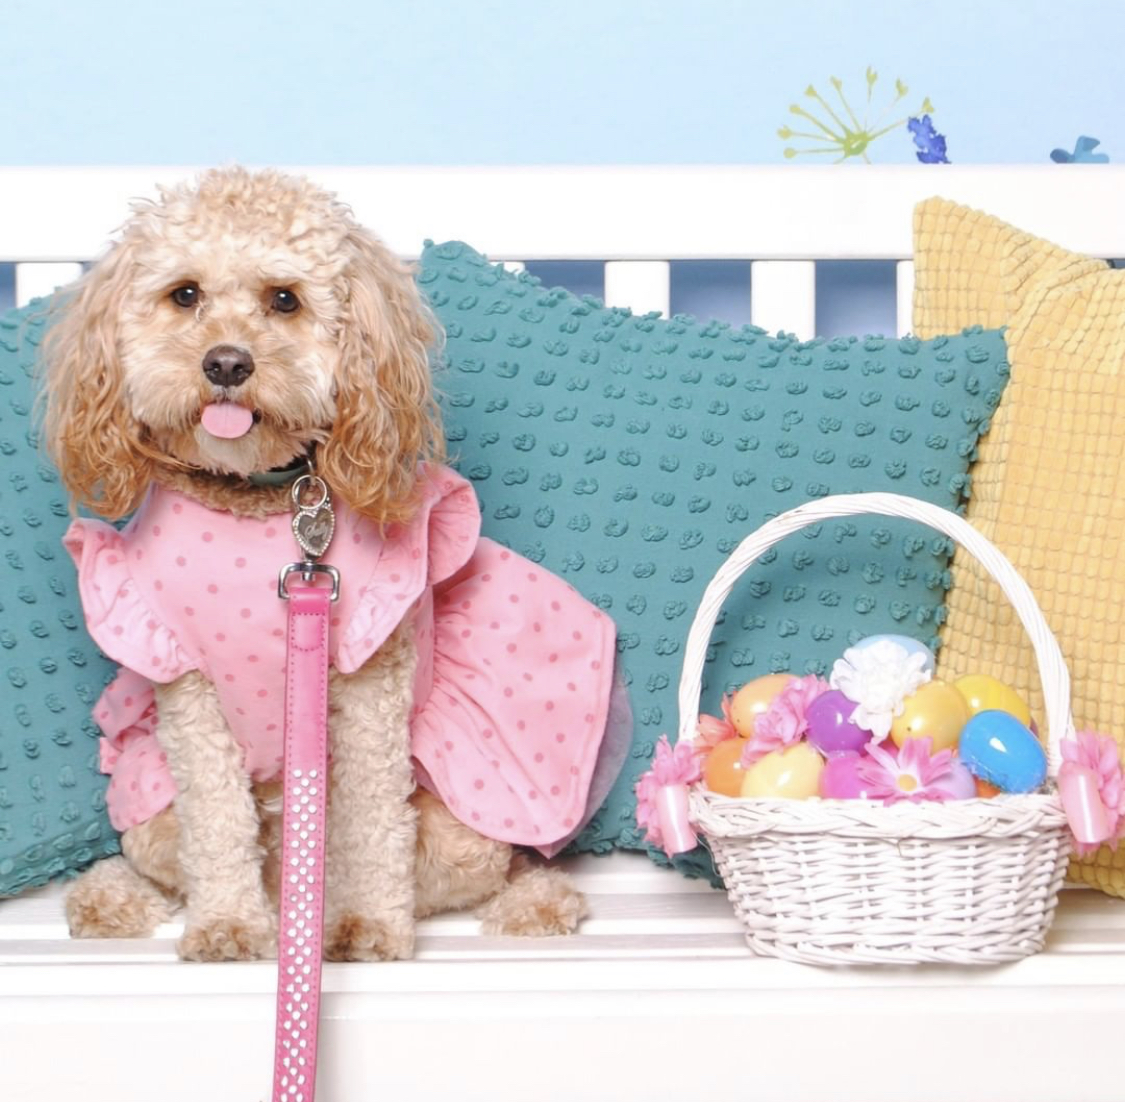 Small dog wearing a pink dress with an Easter basket